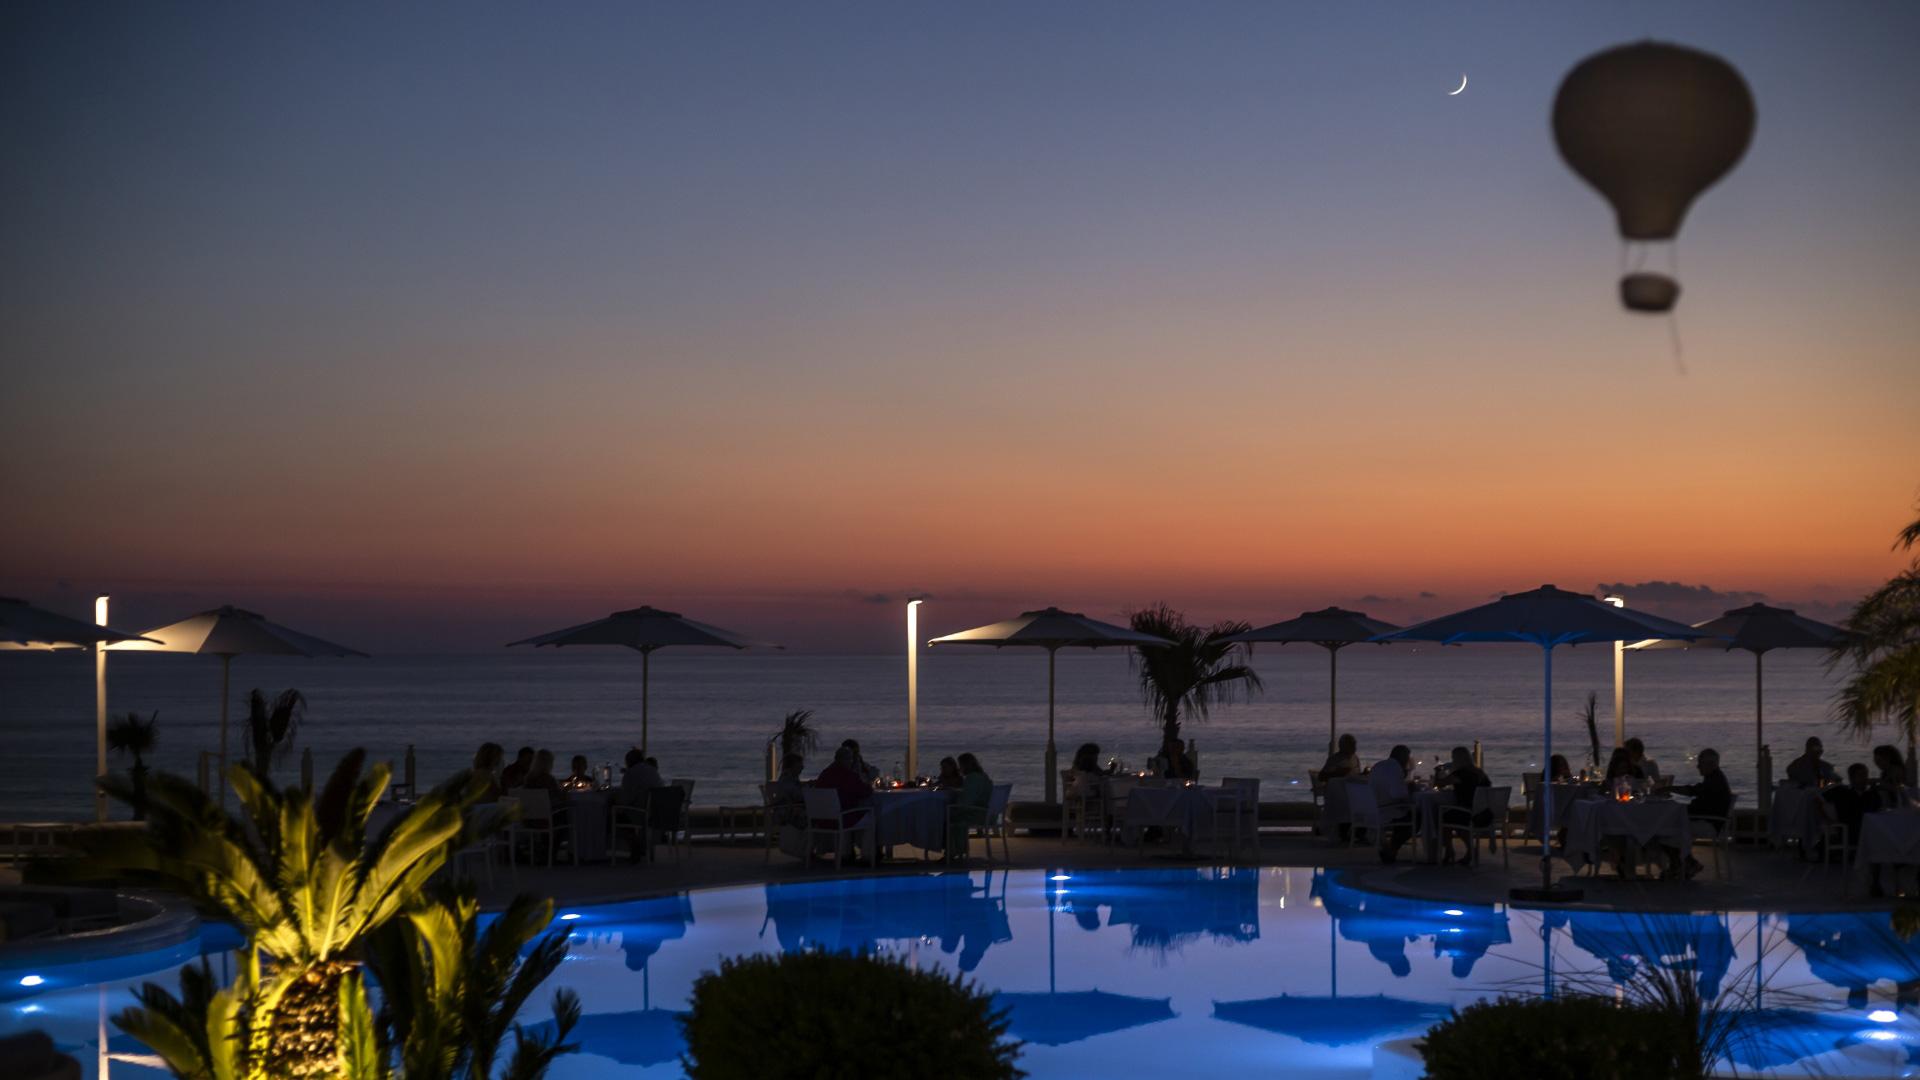 Sunset over the sea with illuminated pool and people dining.